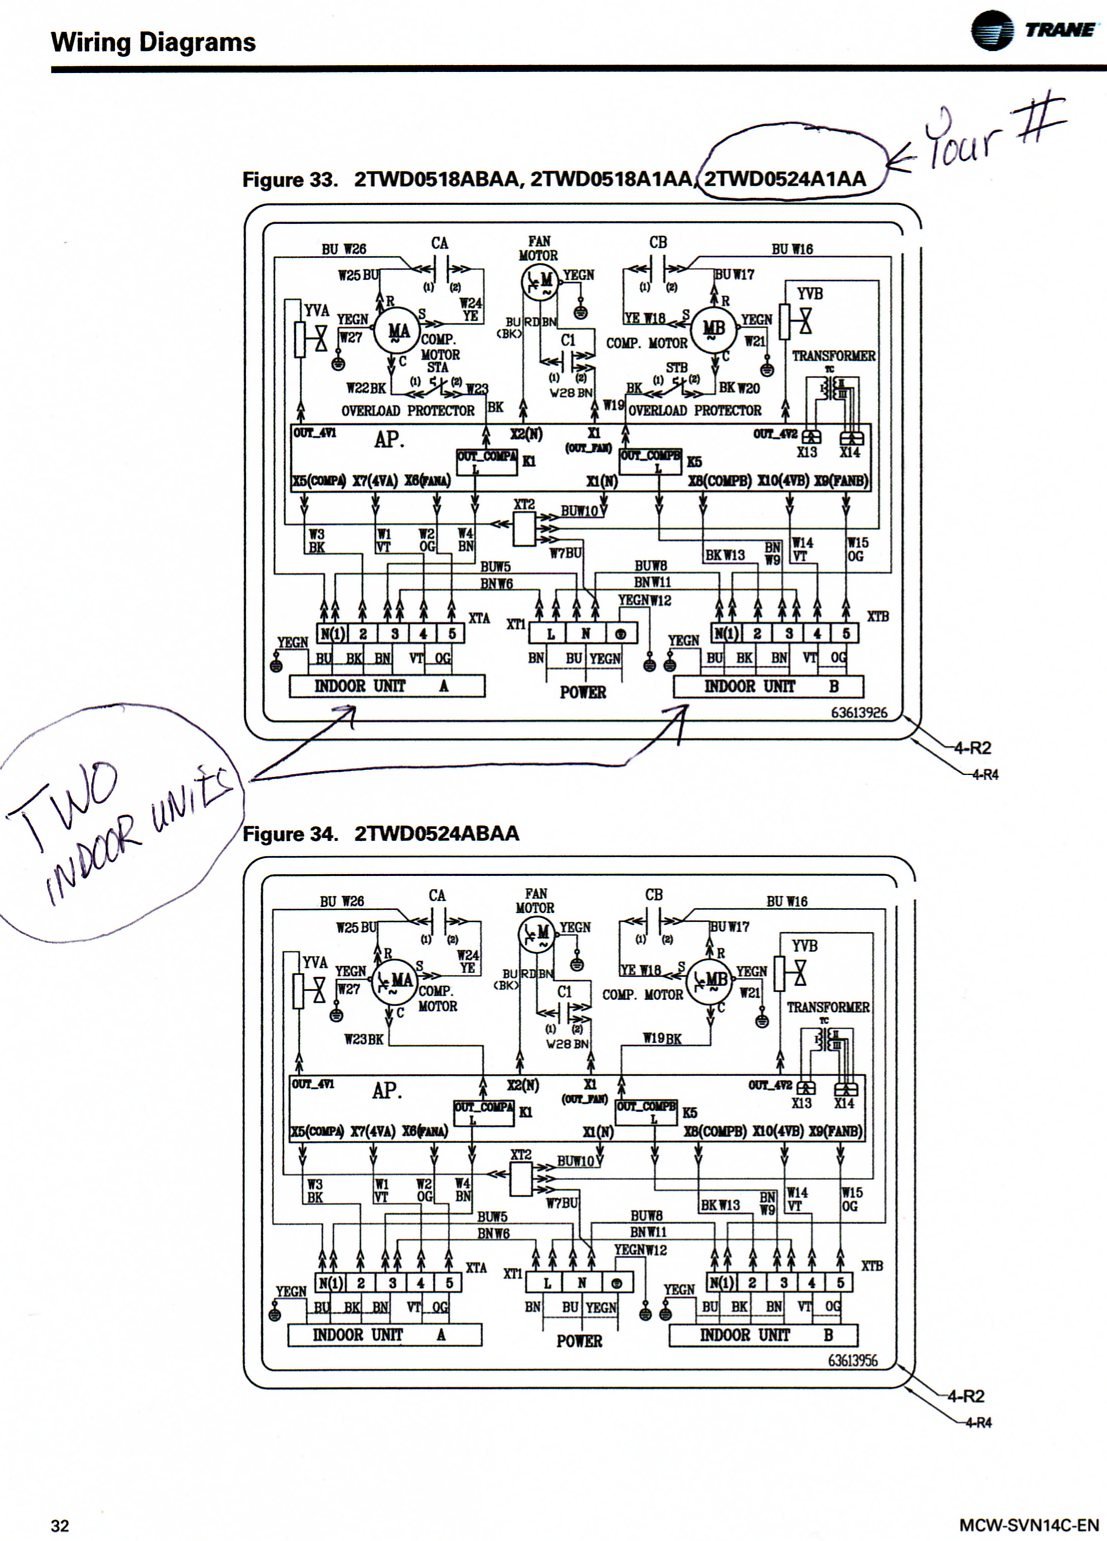 Trane Electric Furnace Wiring Diagram from schematron.org